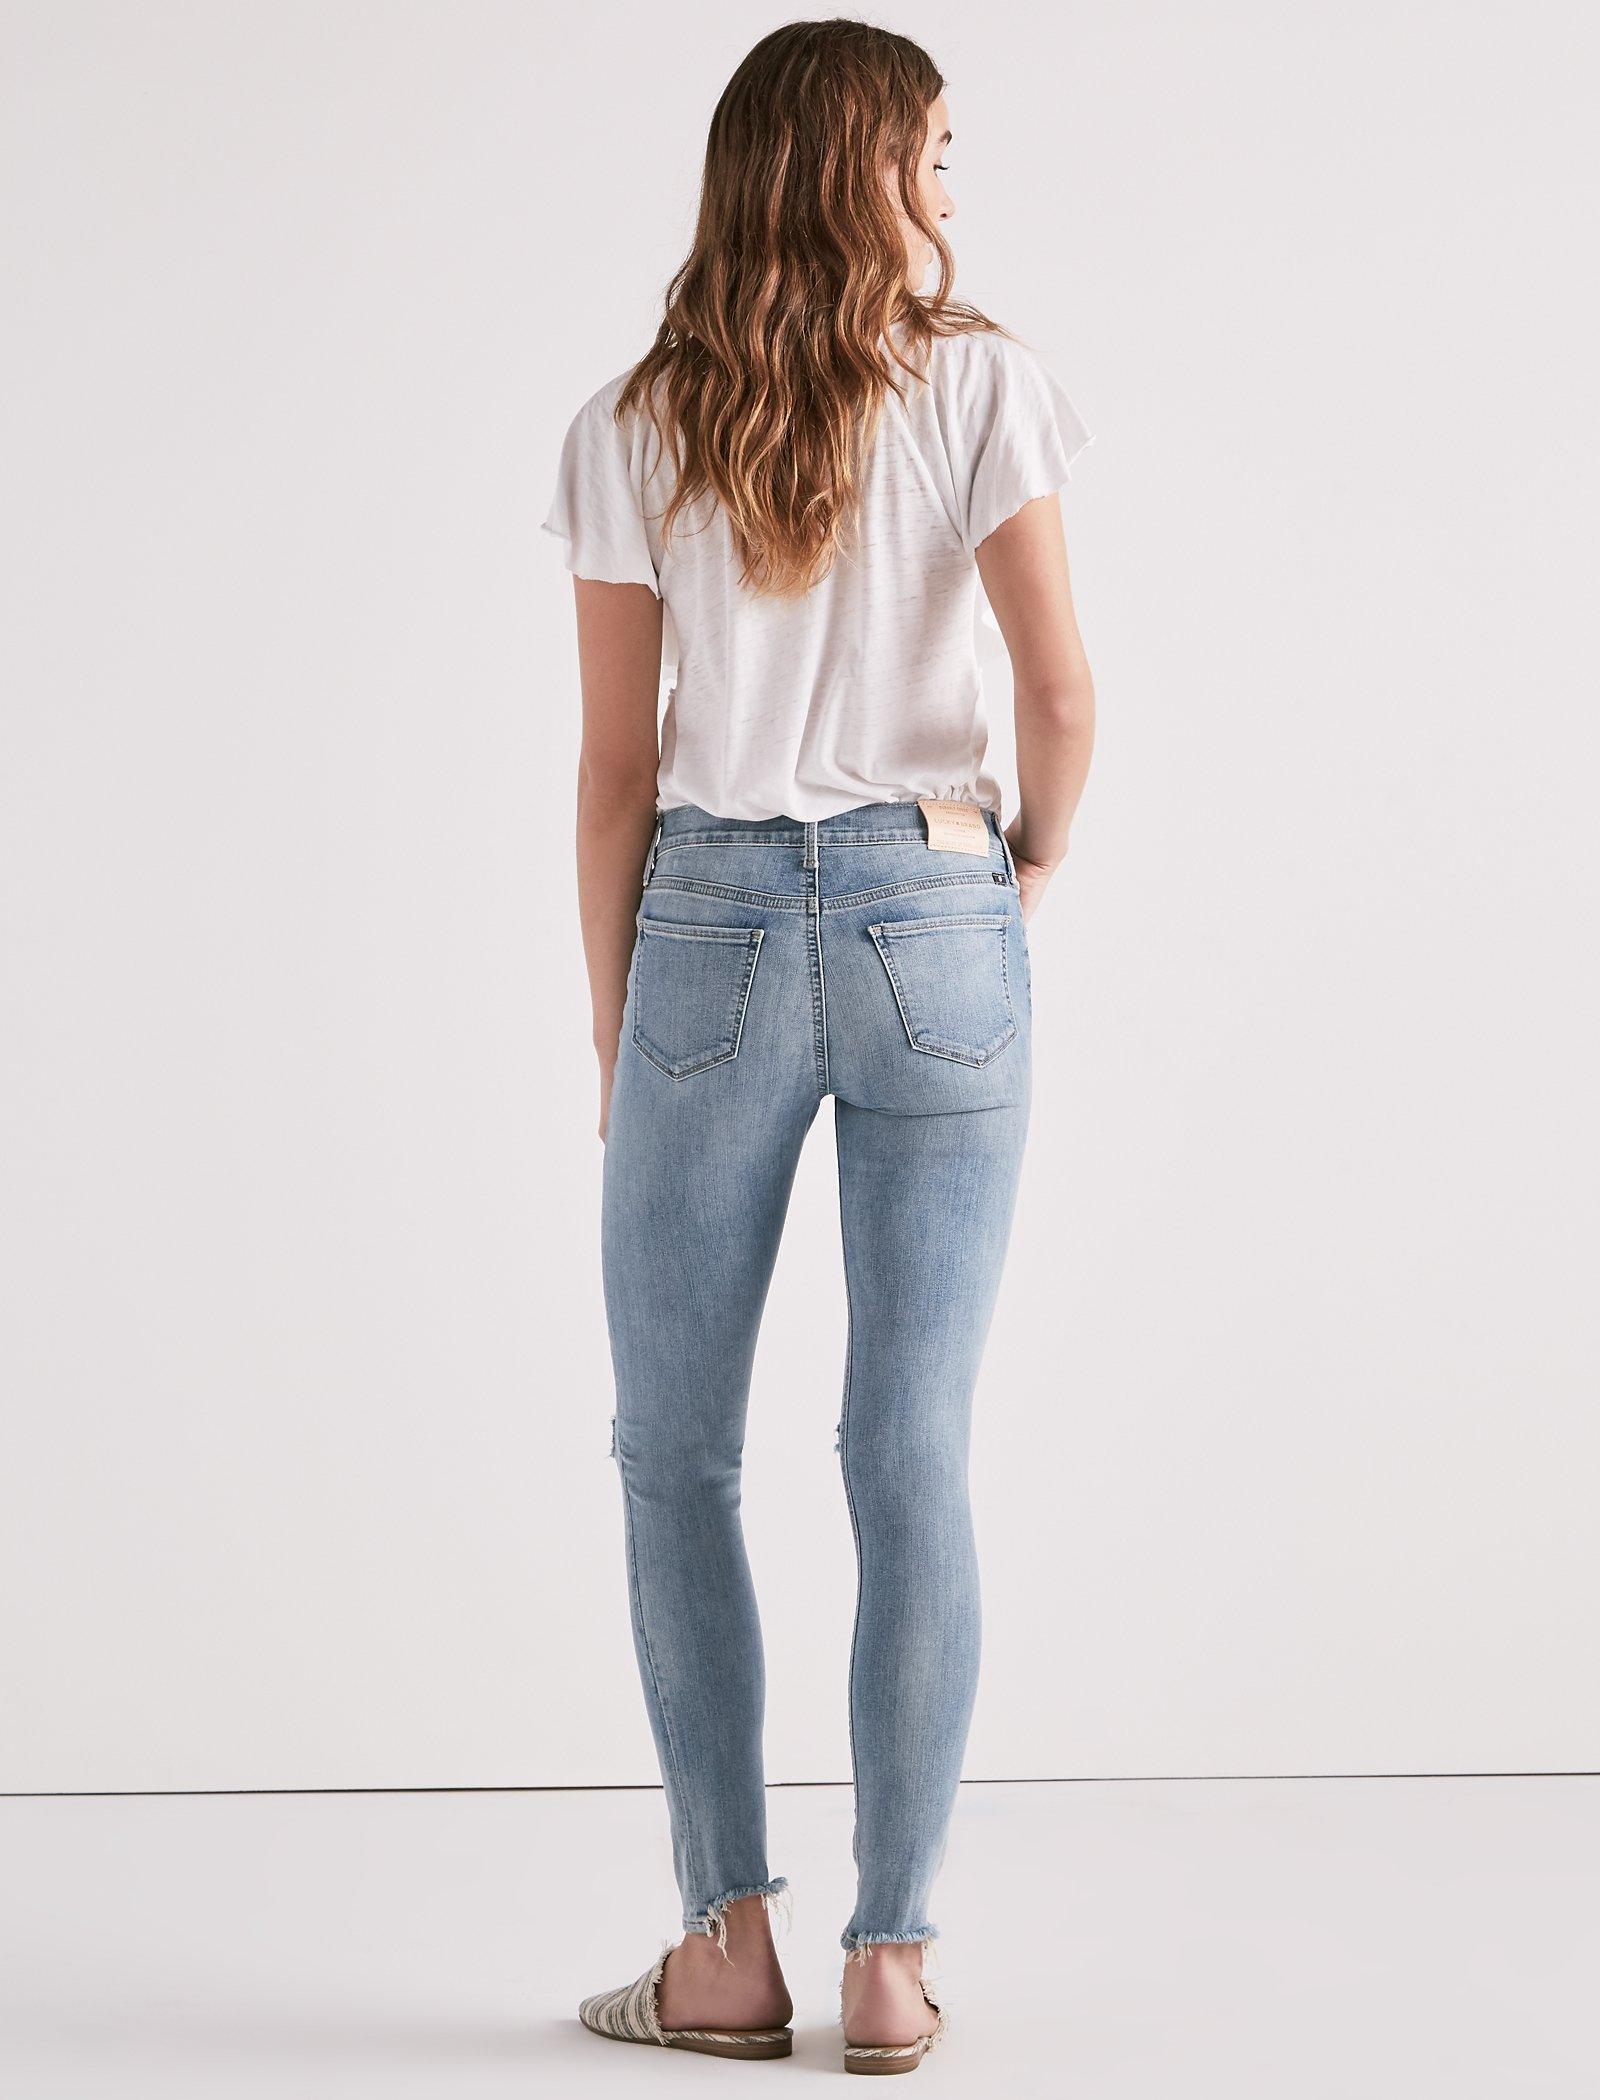 brooke jeans lucky brand